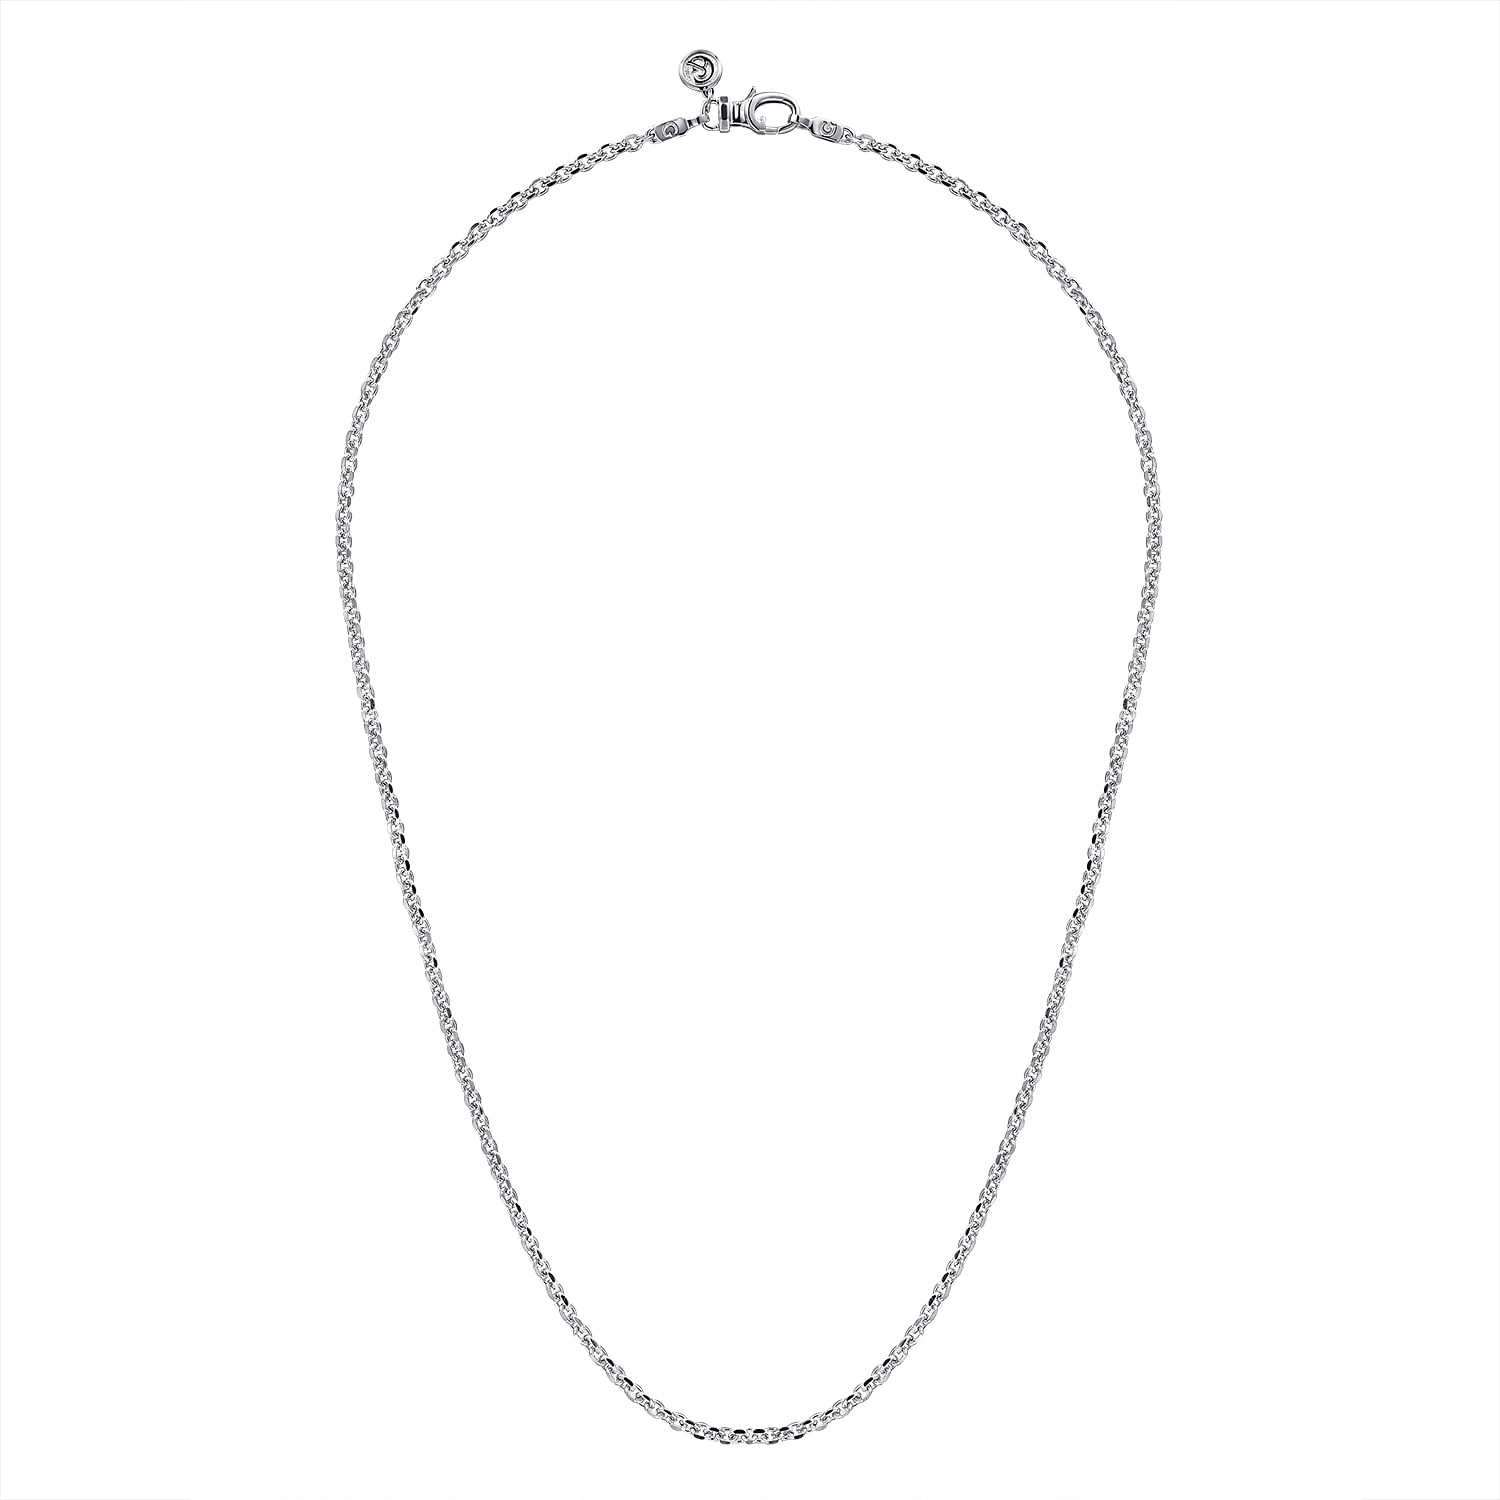 20 Inch 925 Sterling Silver Men's Link Chain Necklace 